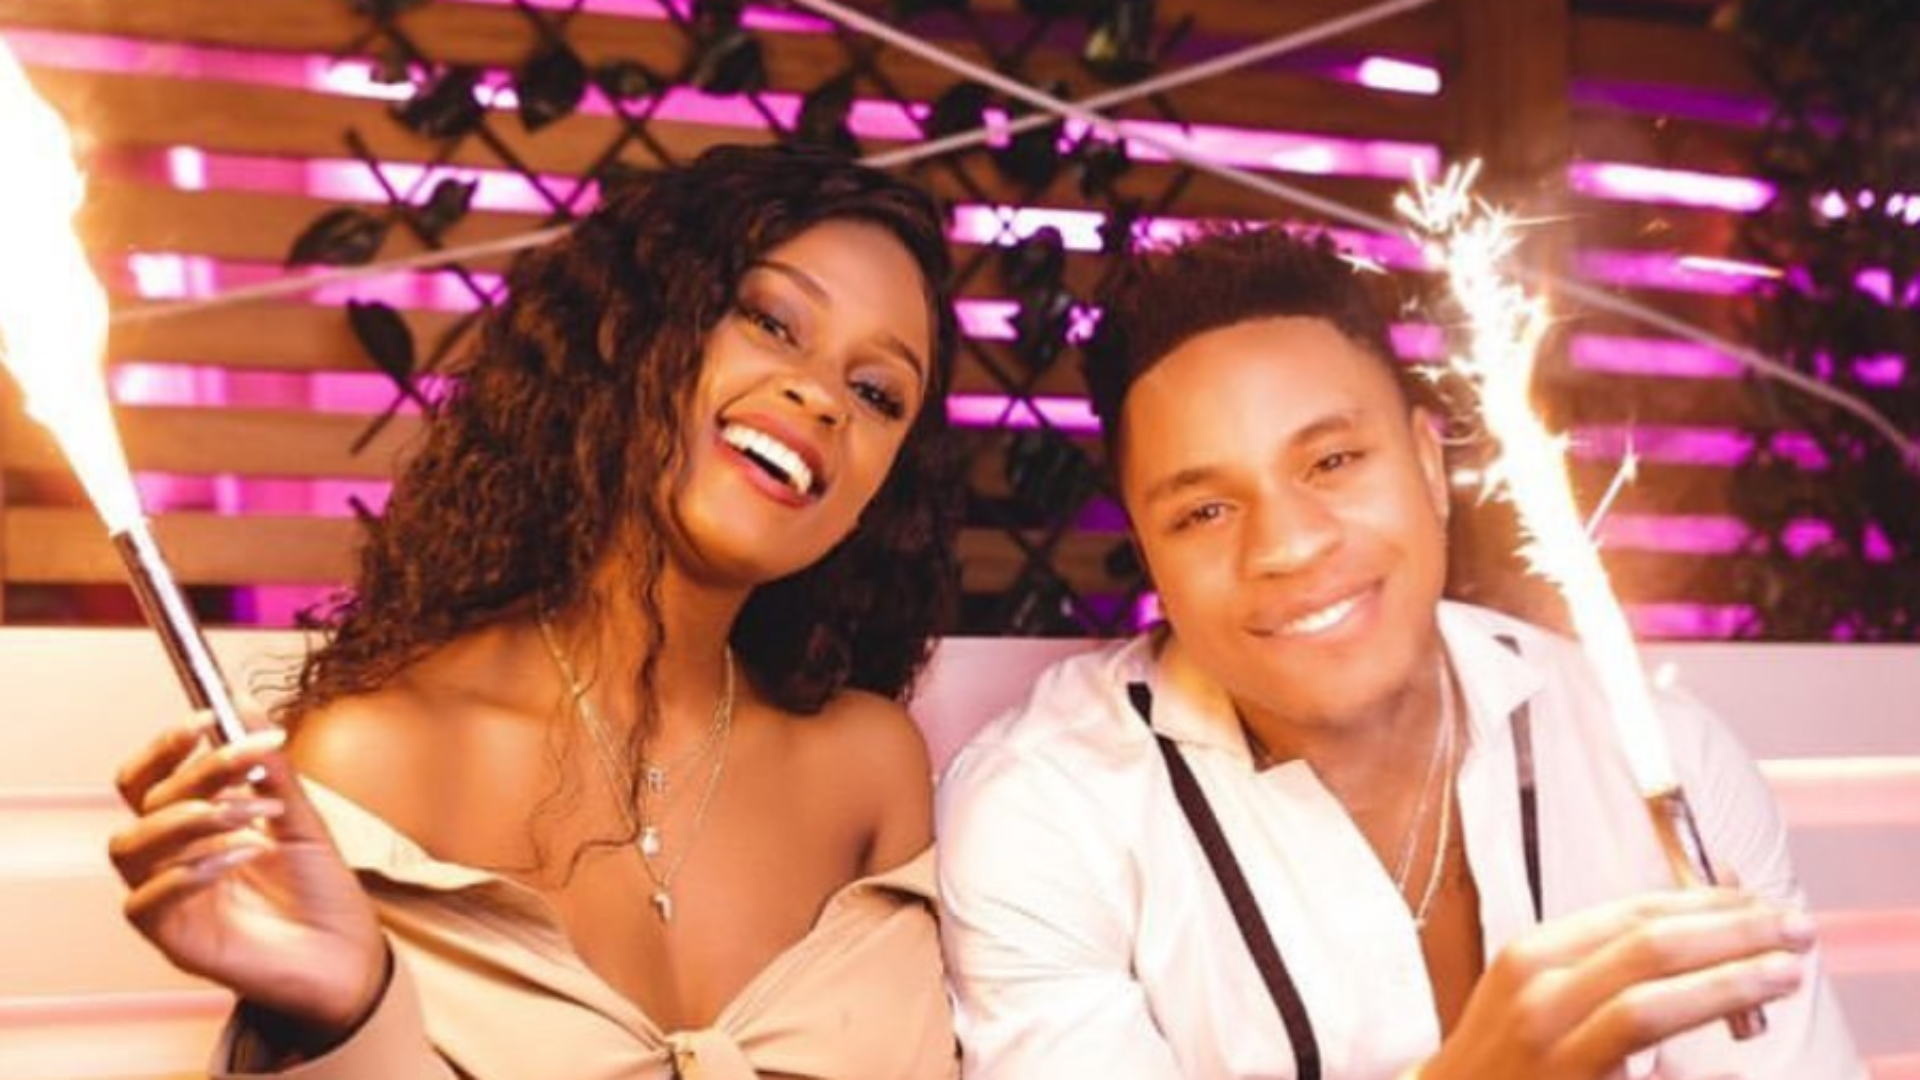 Rotimi May Have Found His 'Future Mrs. Butterscotch' In Singer Vanessa Mdee